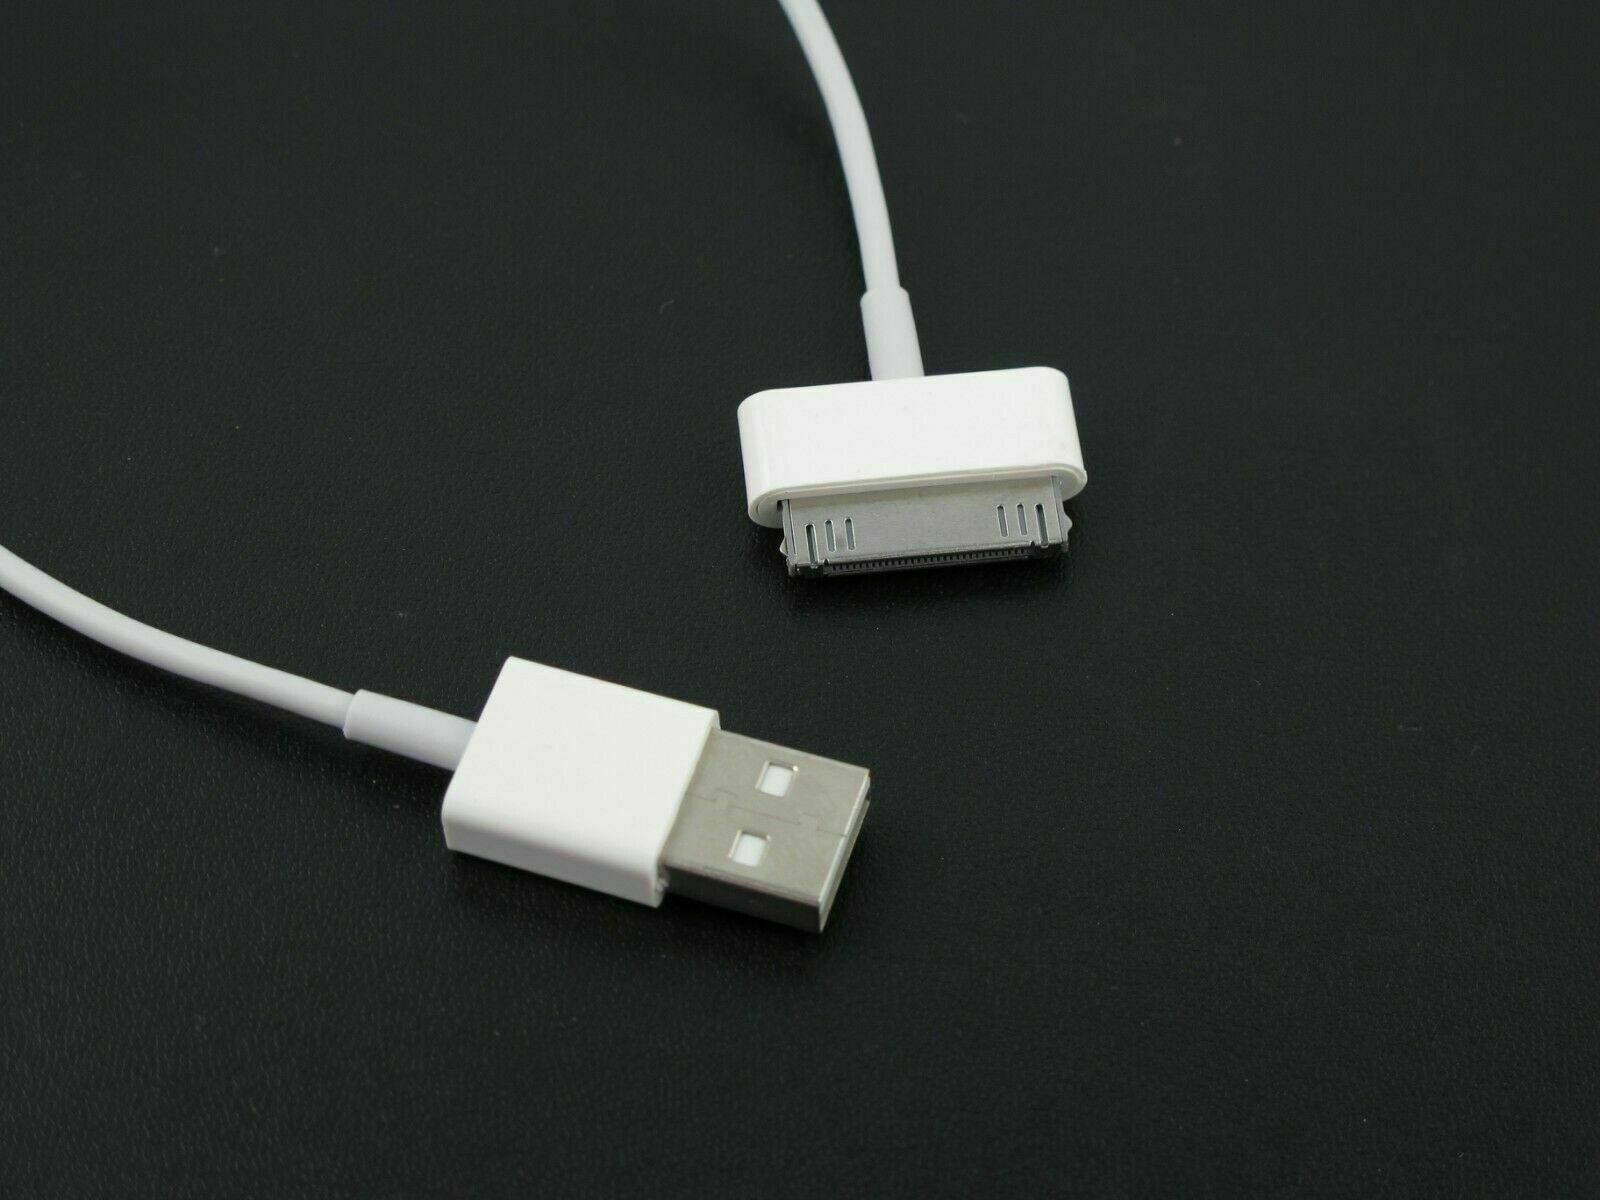 2 USB Charger Cable for Tablet Apple iPad 1 2 3 1st 2nd 3rd GEN Unbranded Does not apply - фотография #4